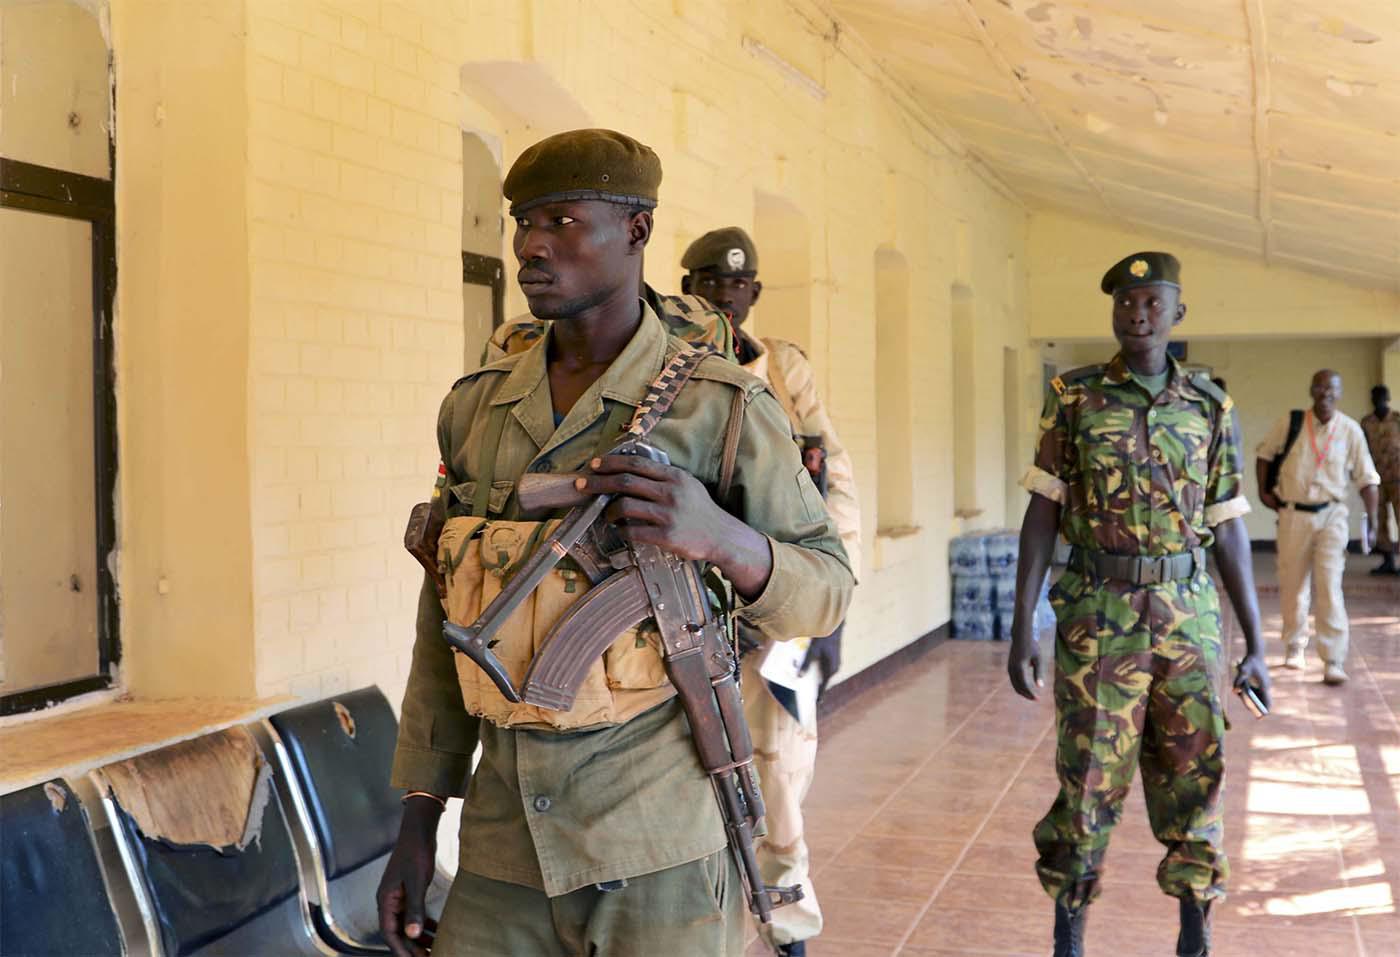 Security was stepped up in Juba